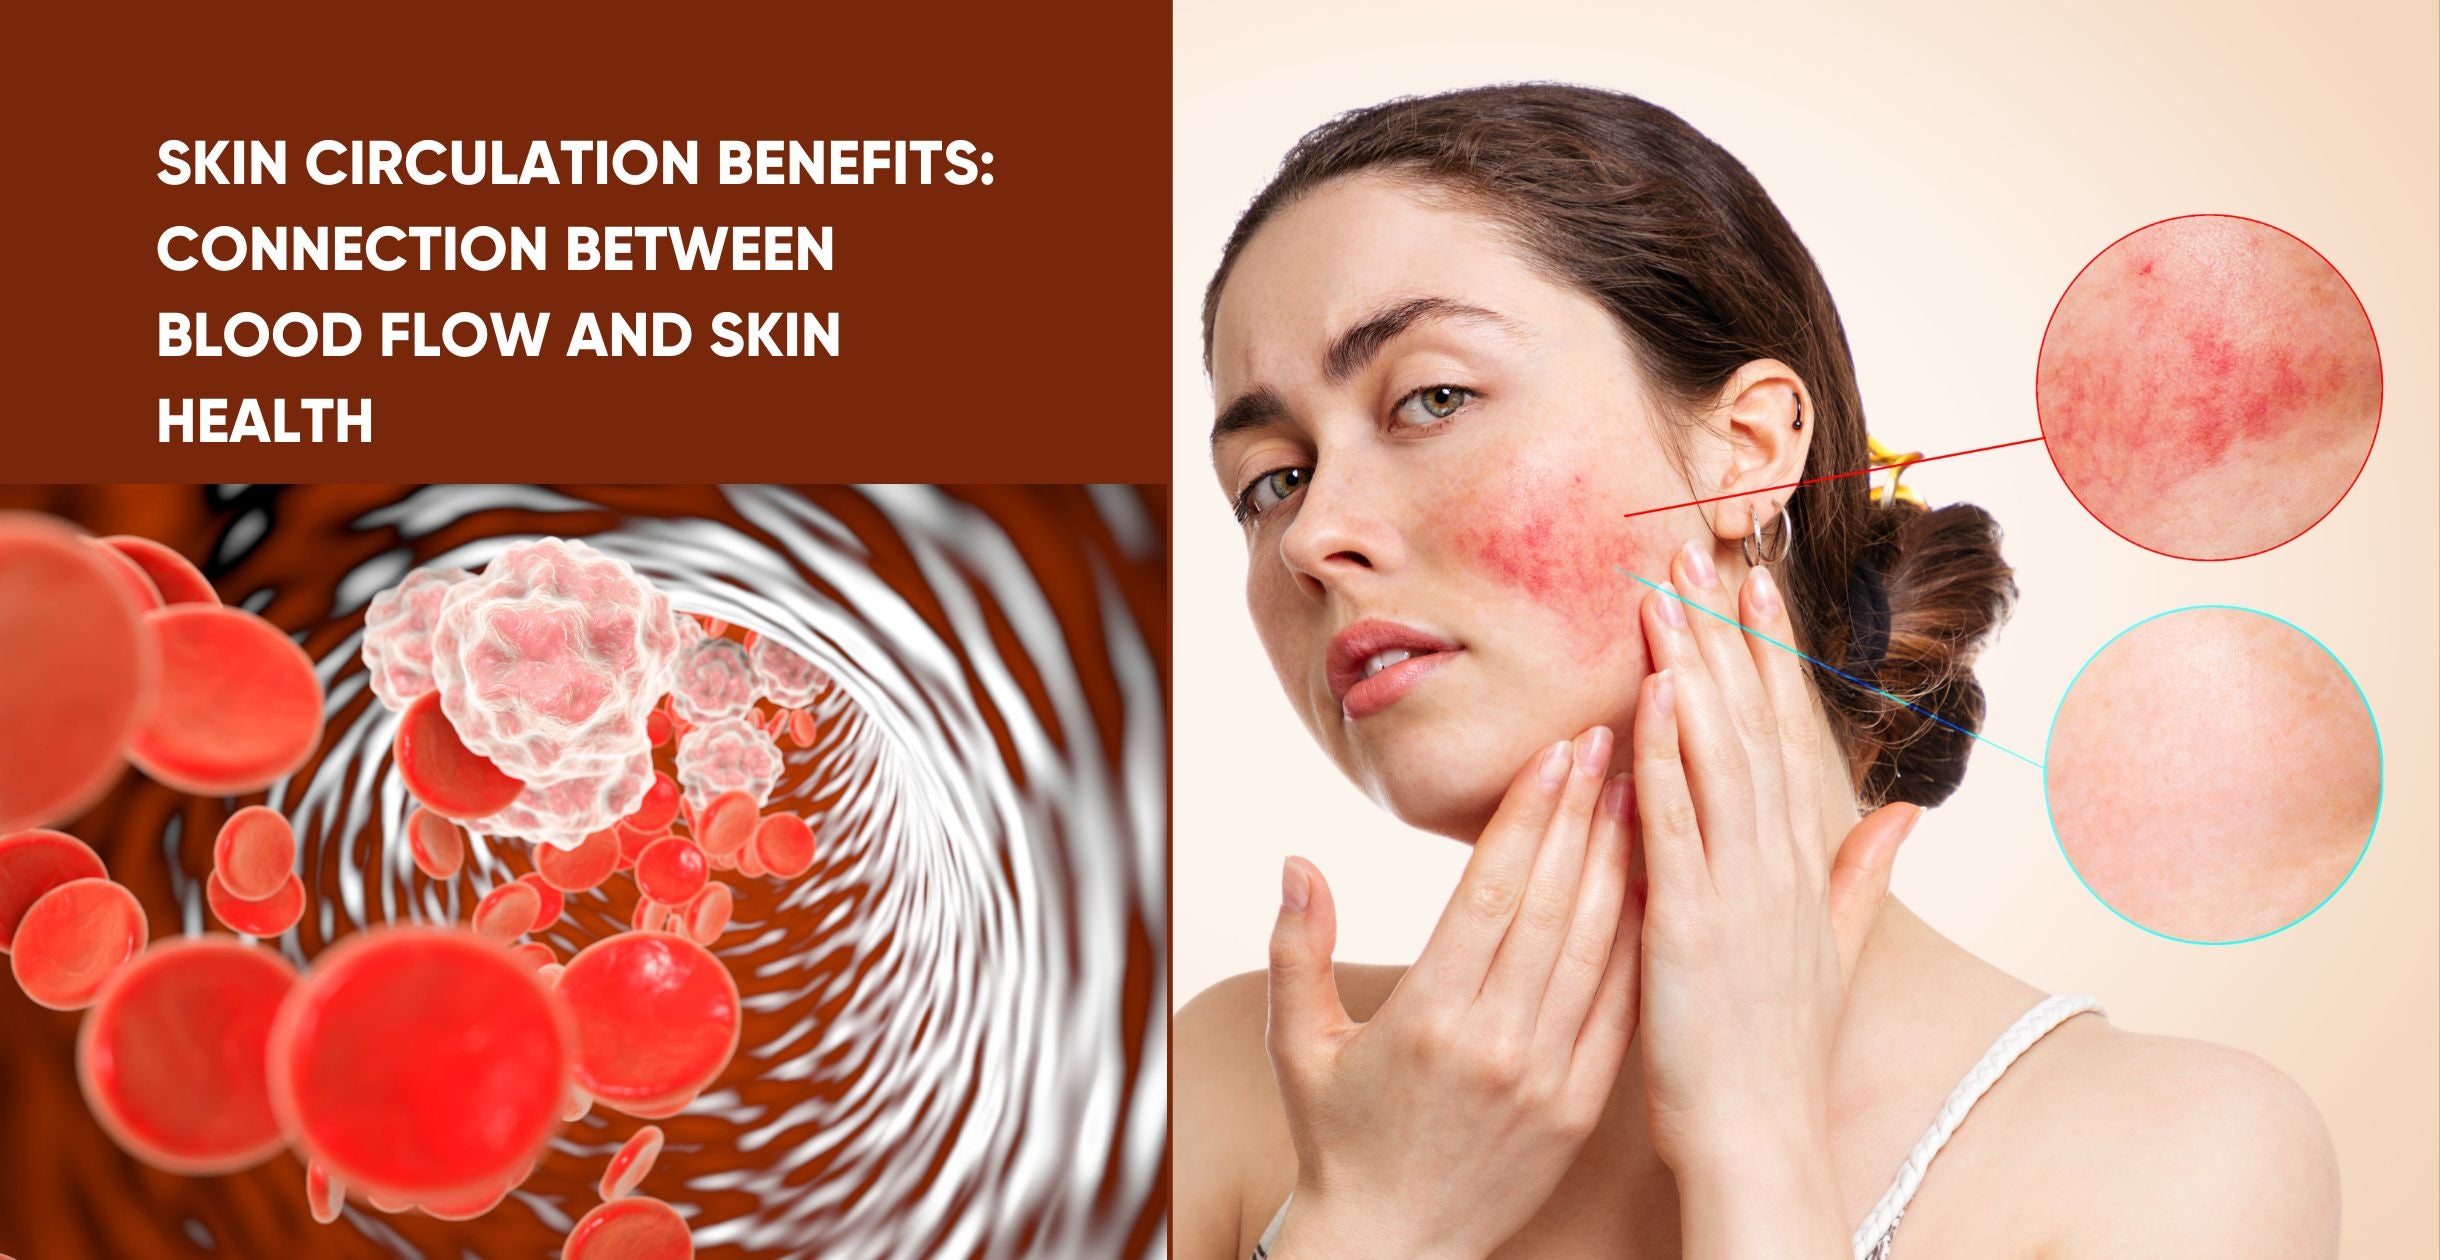 Skin circulation benefits: Connection Between Blood Flow and Skin Health